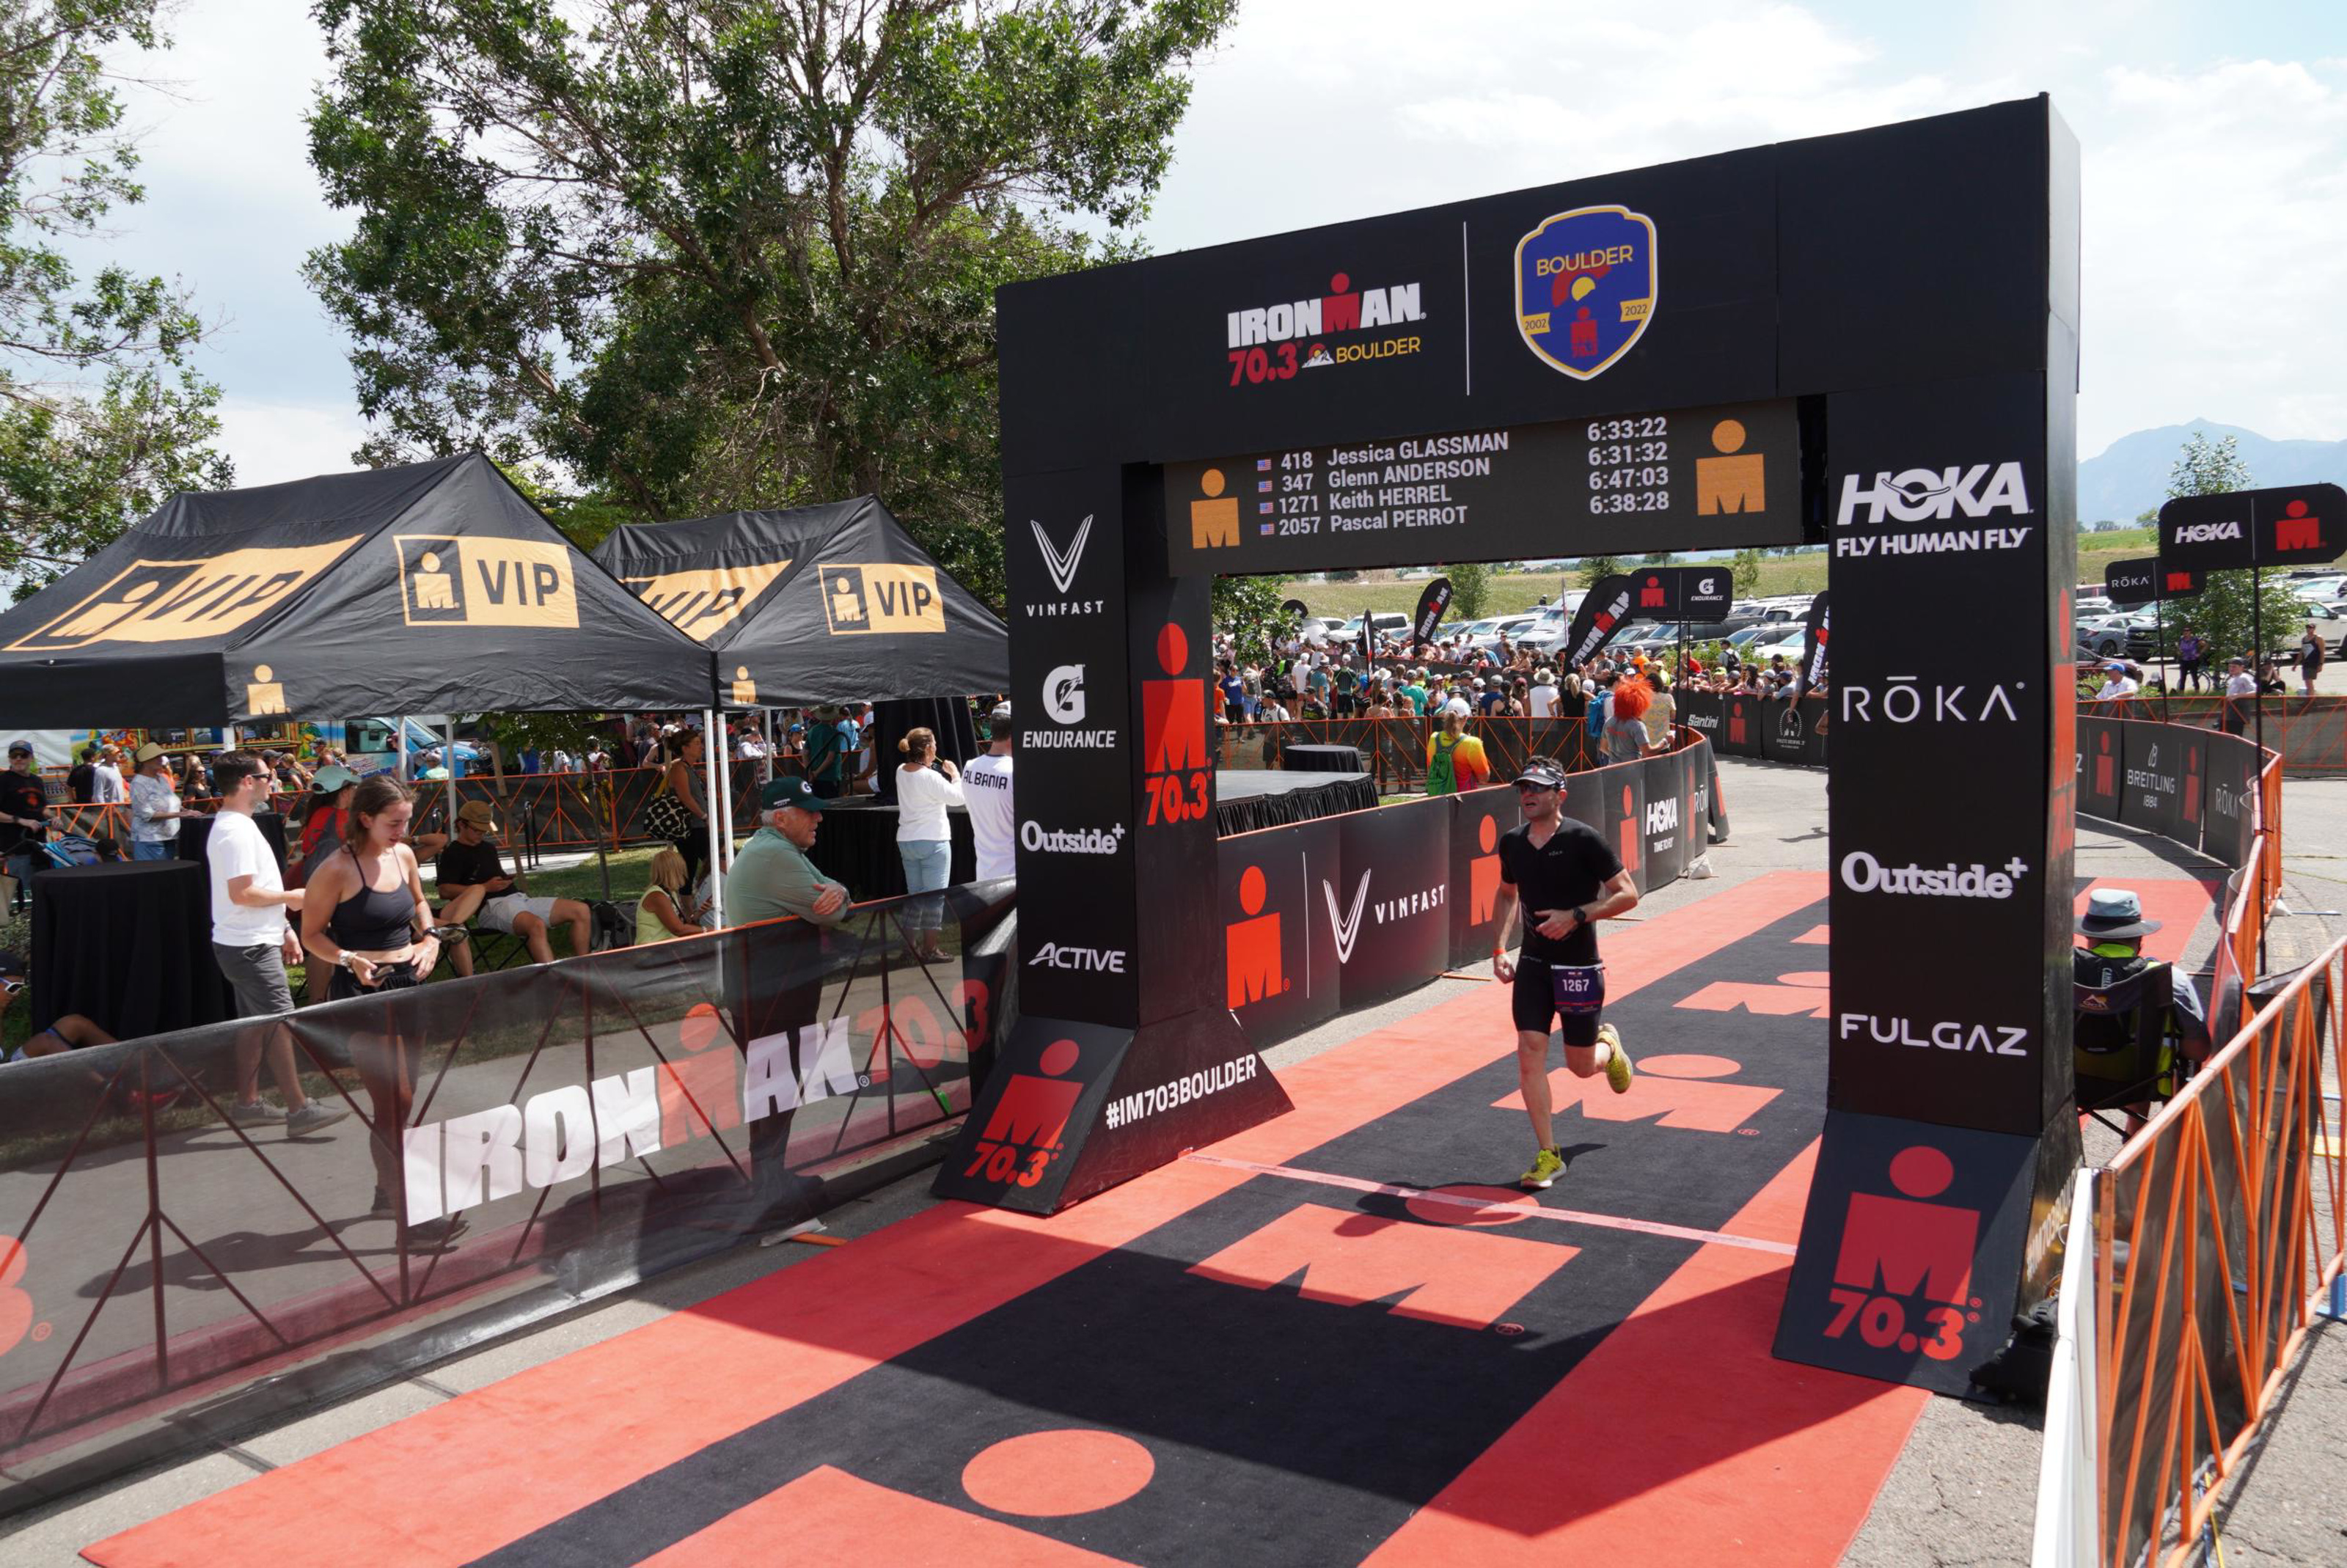 Me, crossing the finish line at Ironman 70.3 Boulder.